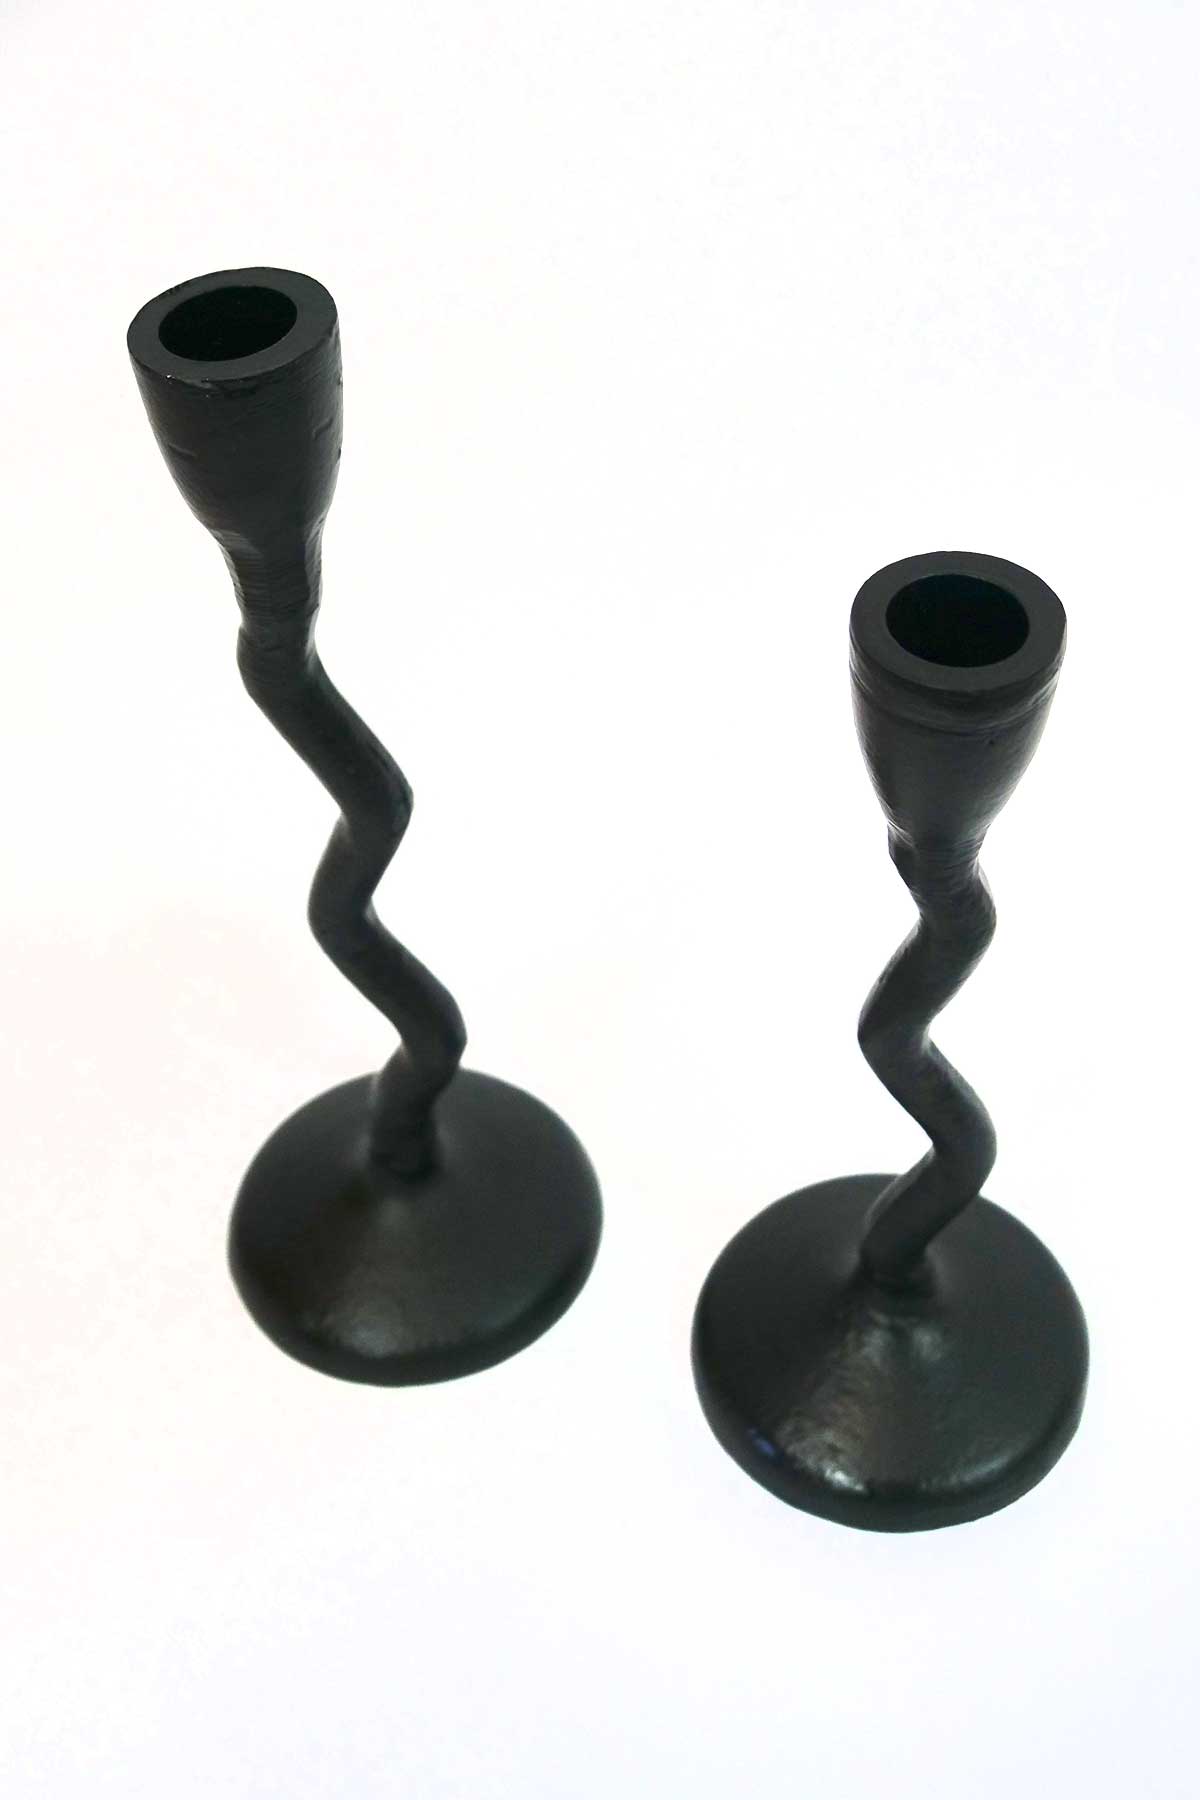 Madras Link Wave Black Candlestick small and large top view